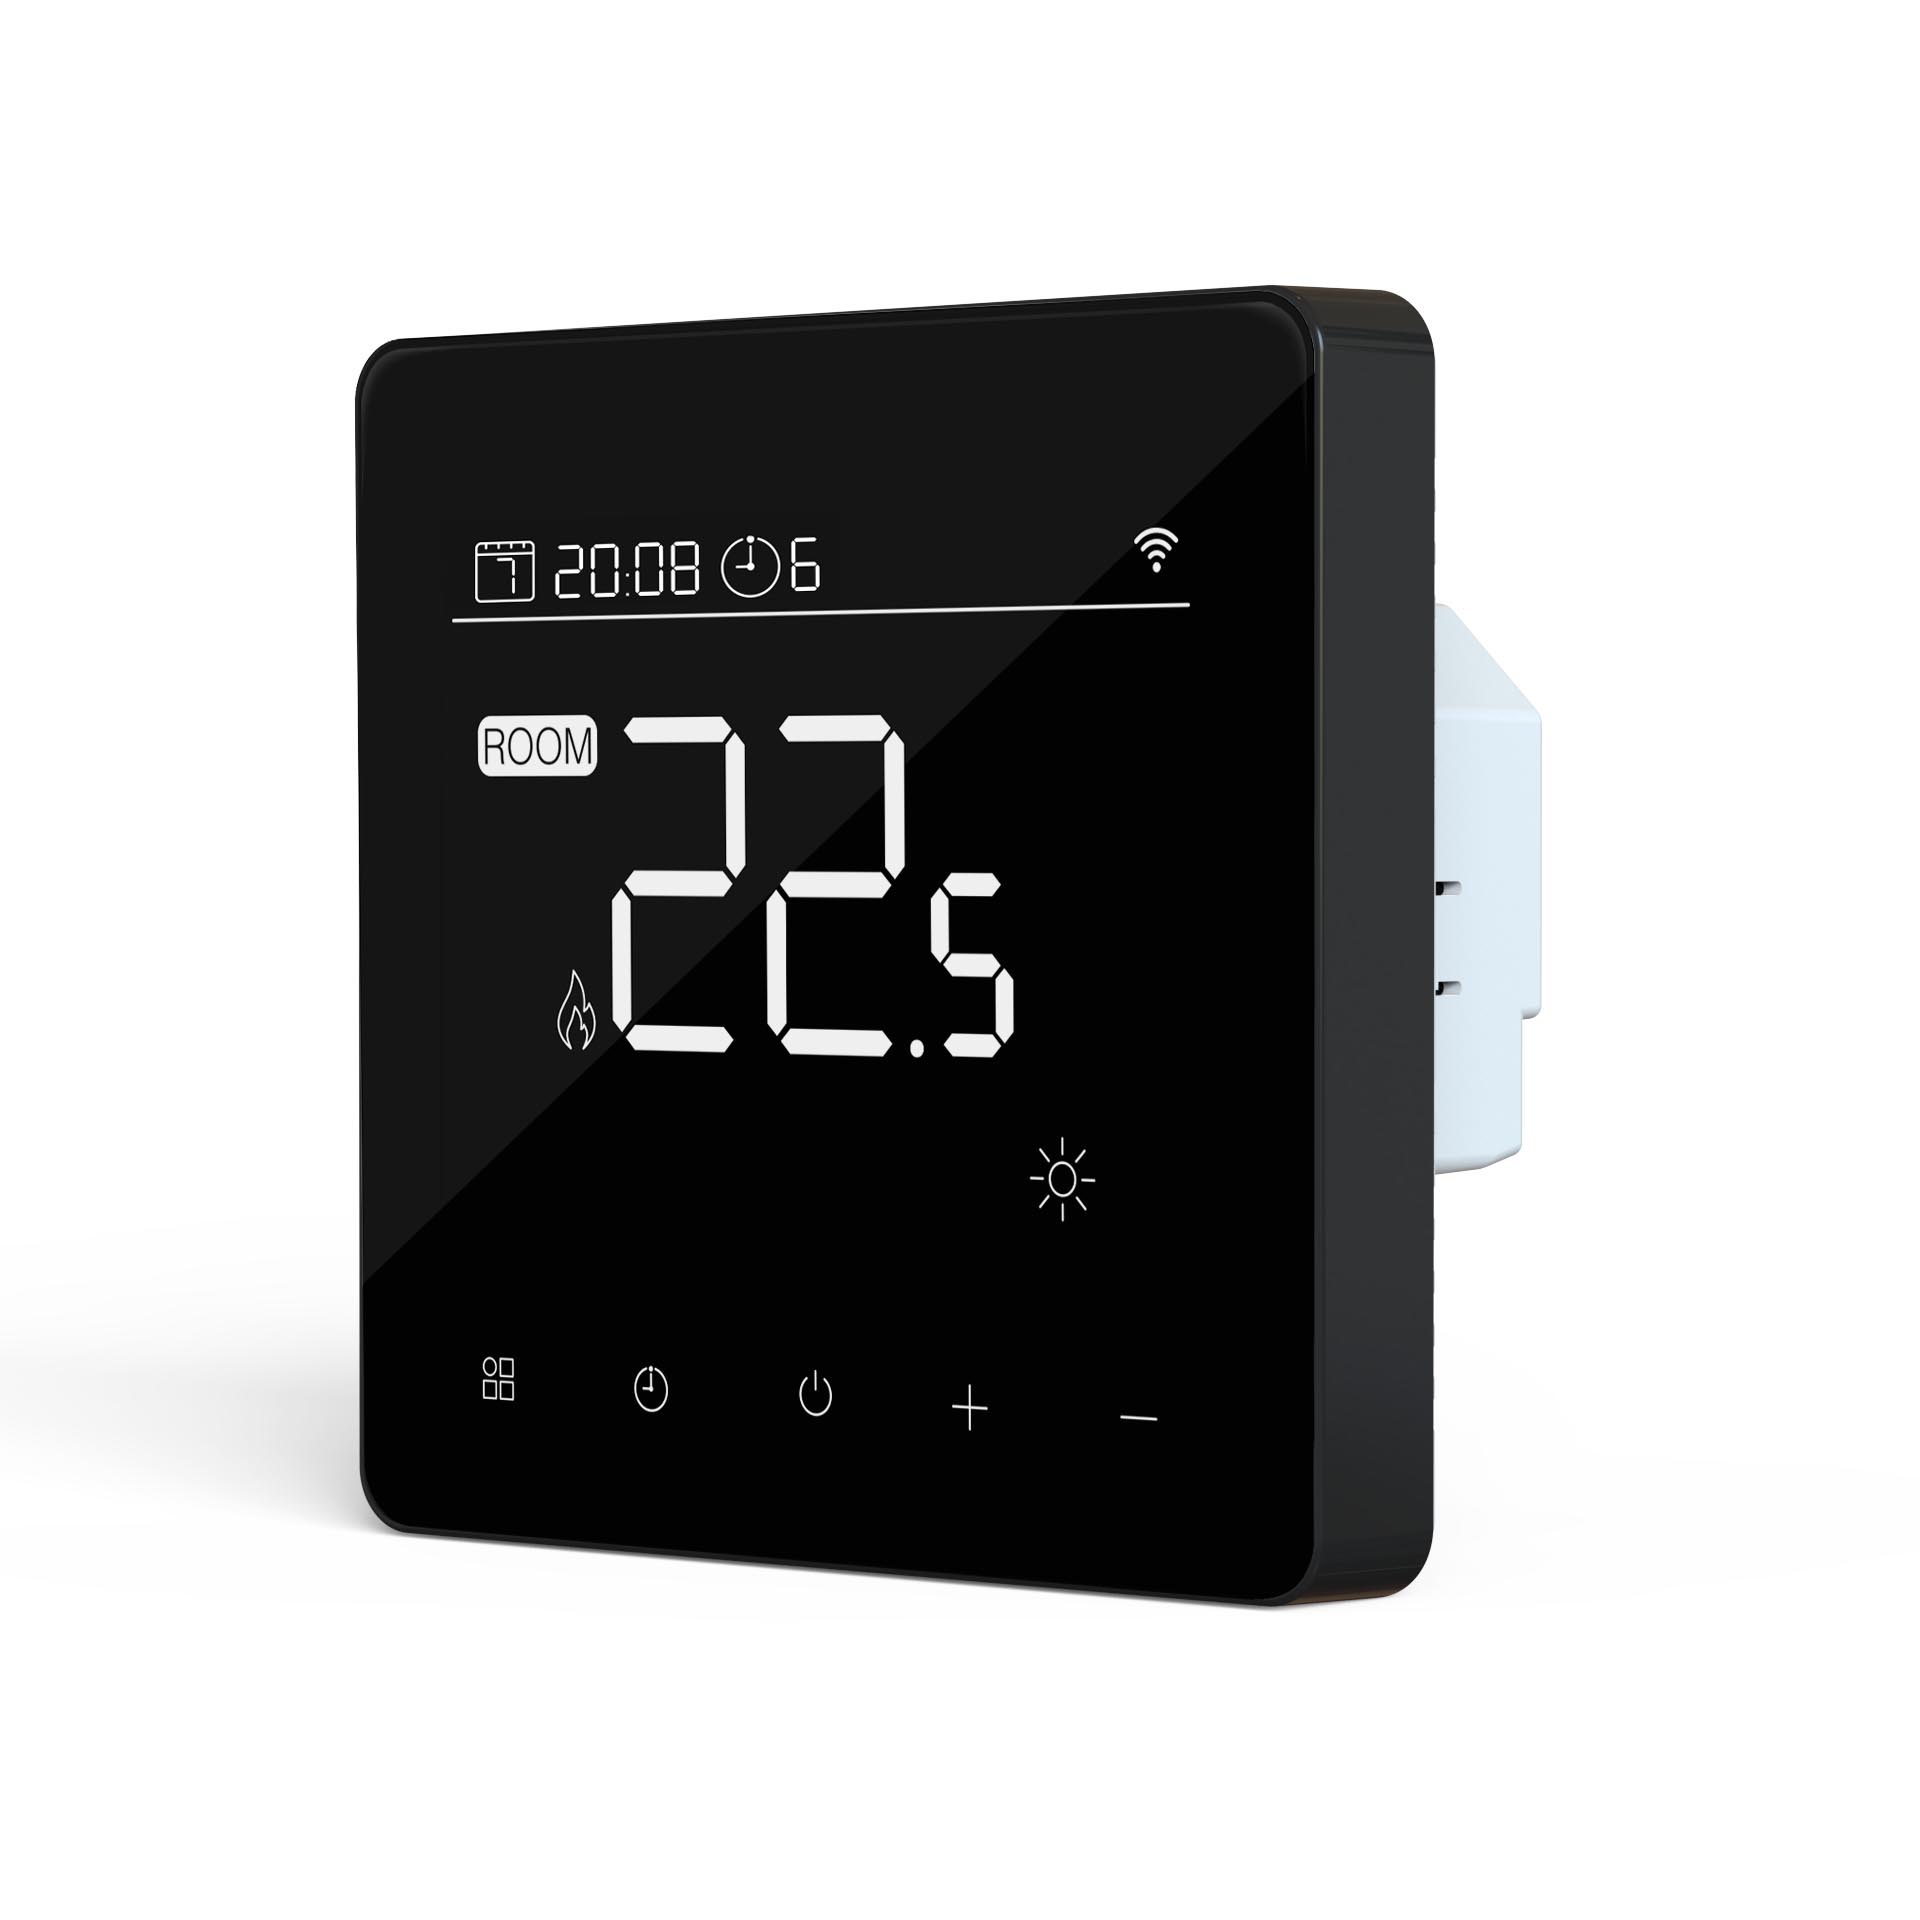 WiFi Programmable Thermostats for Electric/Water Underfloor Heating, Compatible with Google Home and Alexa Voice Control